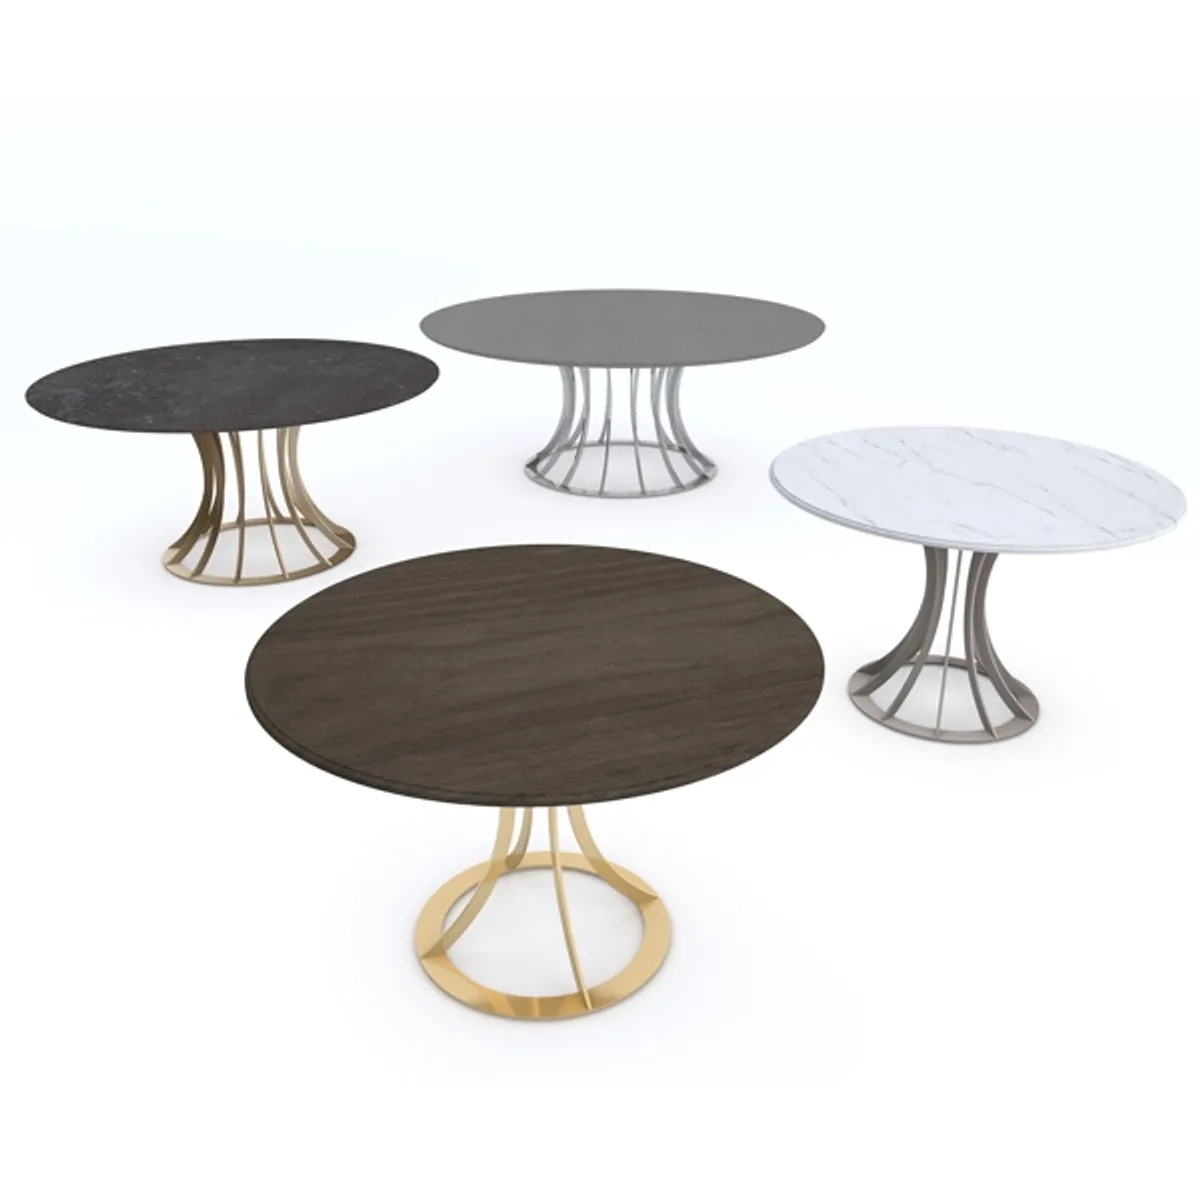 Blondelle table Inside Out Contracts7